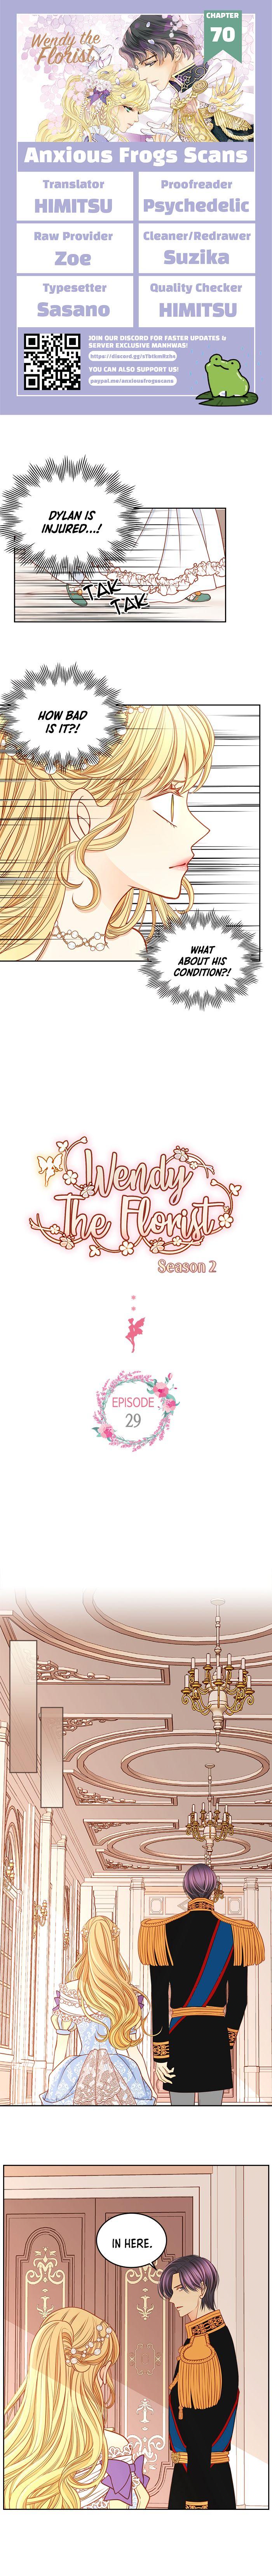 Wendy the Florist Chapter 70 - Page 0